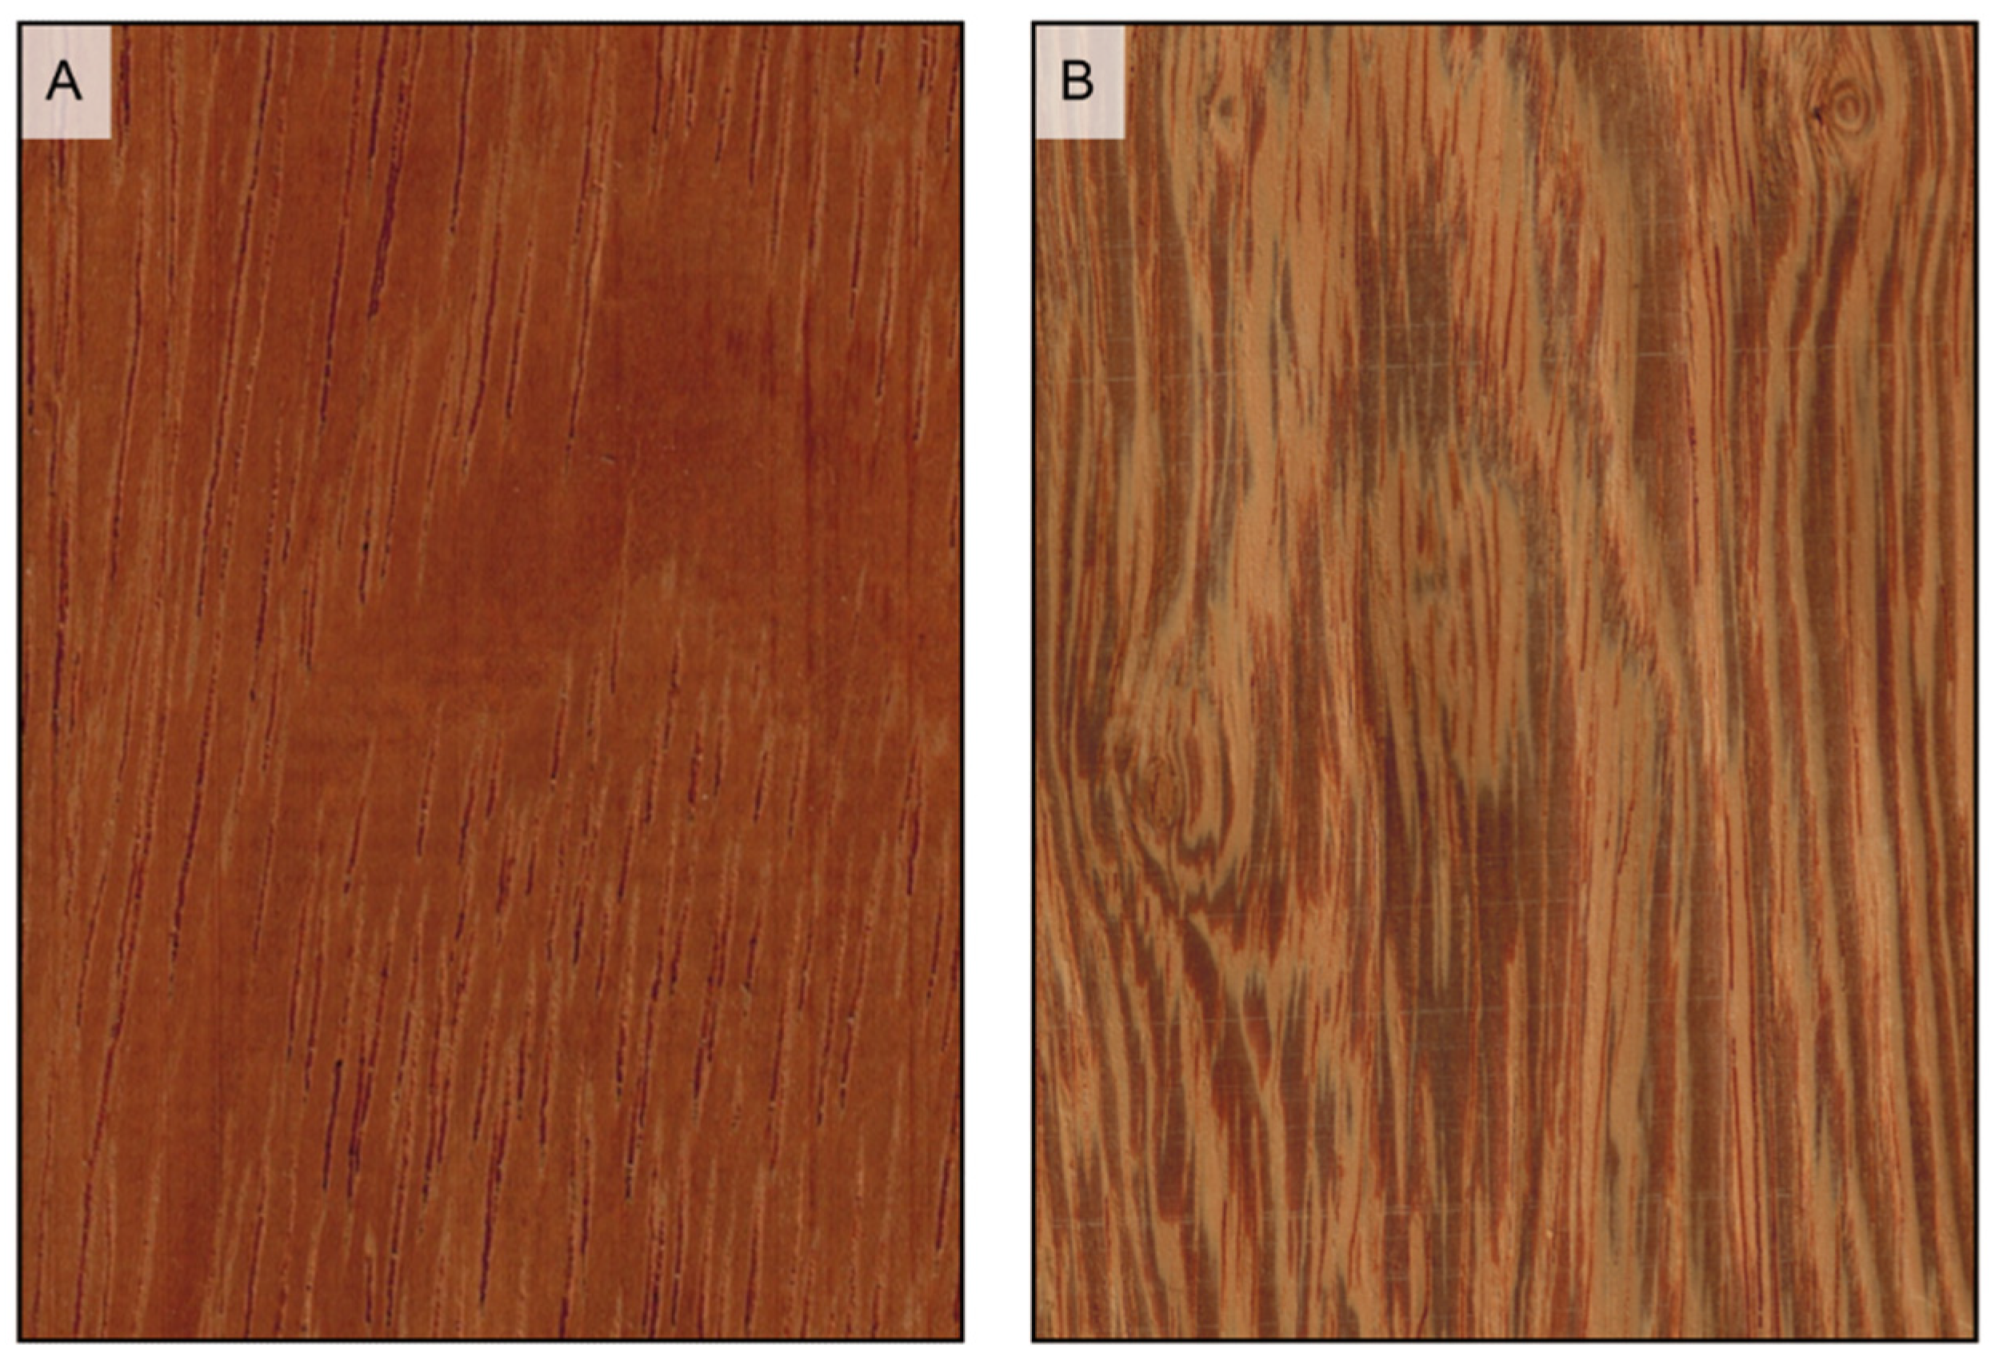 Forests | Free Full-Text | The Macroscopic Structure of Wood